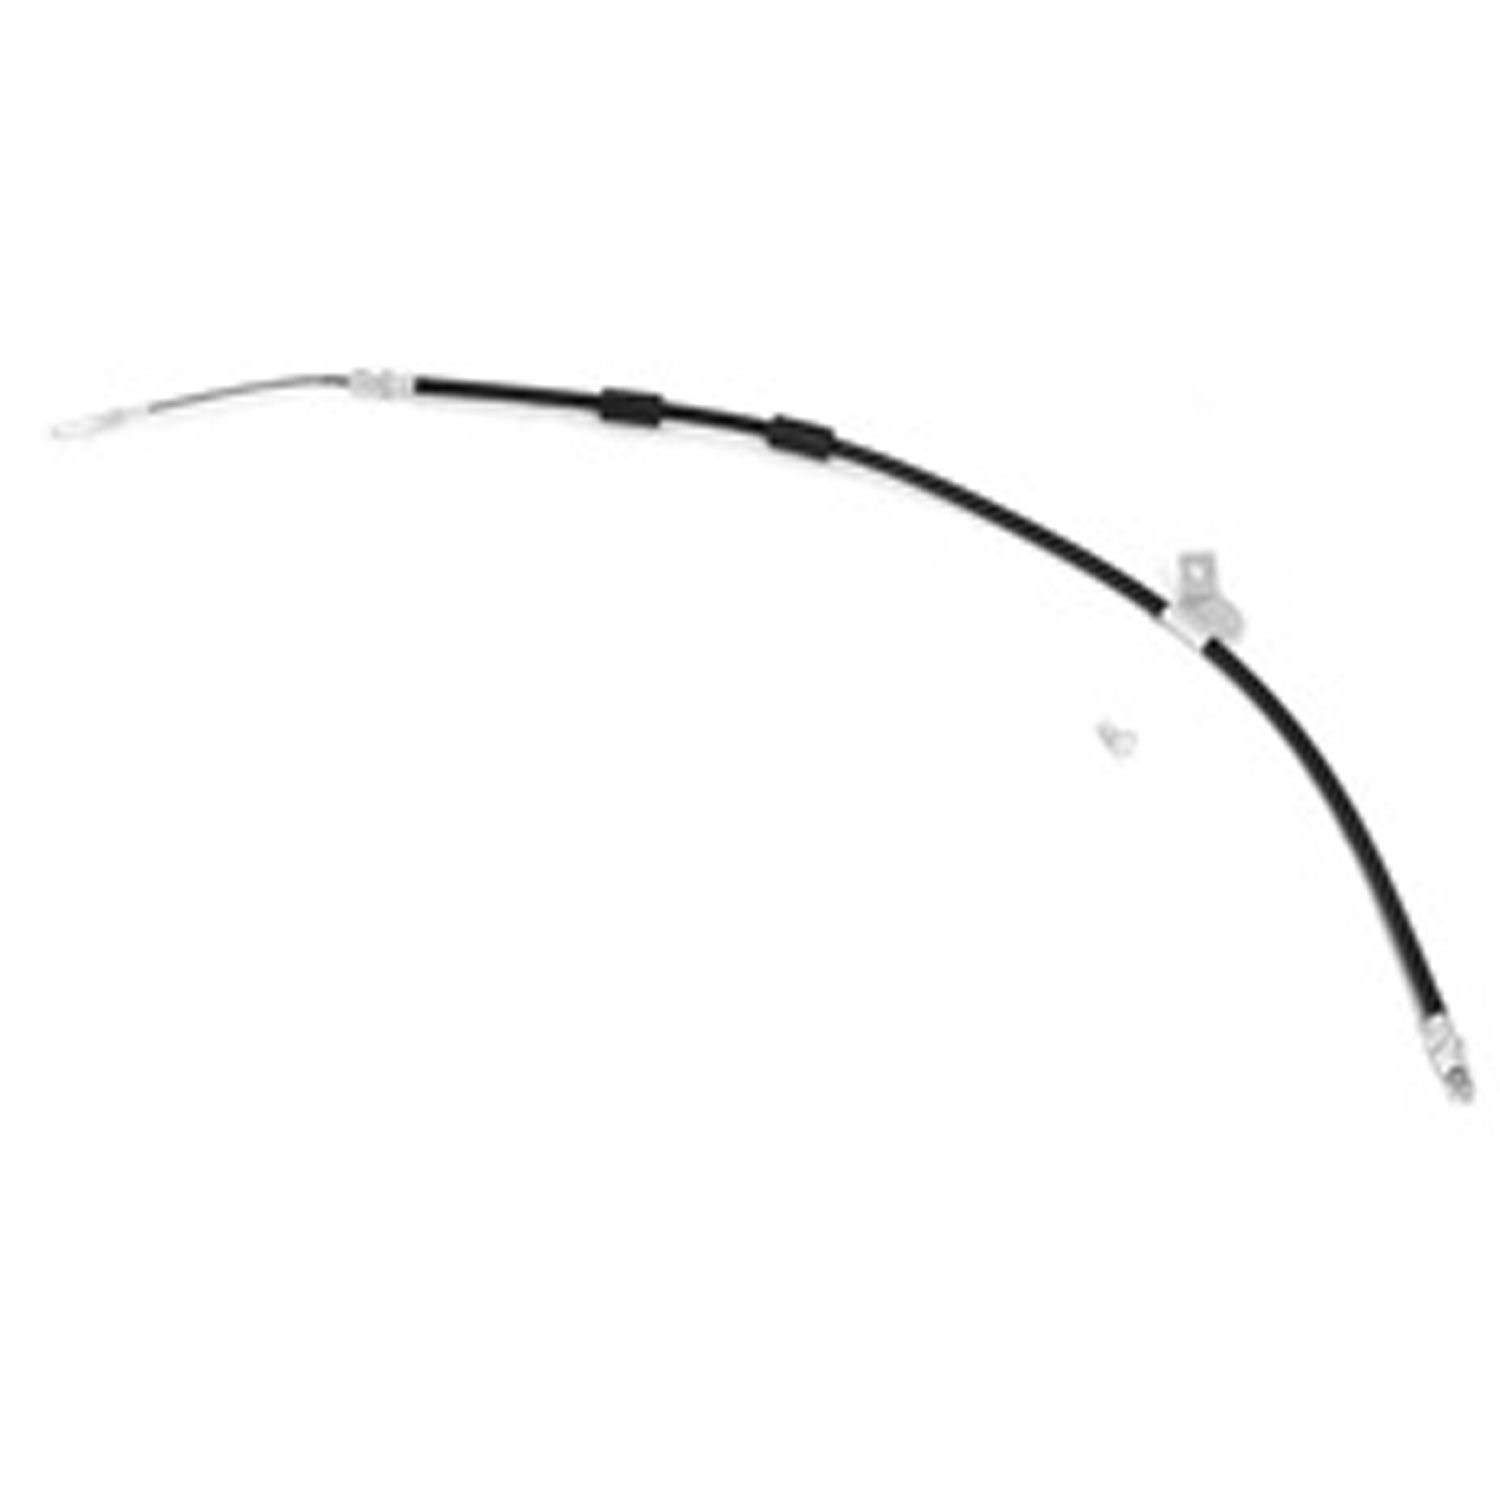 Replacement Left Rear Brake Hose For 1999-2004 Jeep Grand Cherokee WJ By Omix-ADA